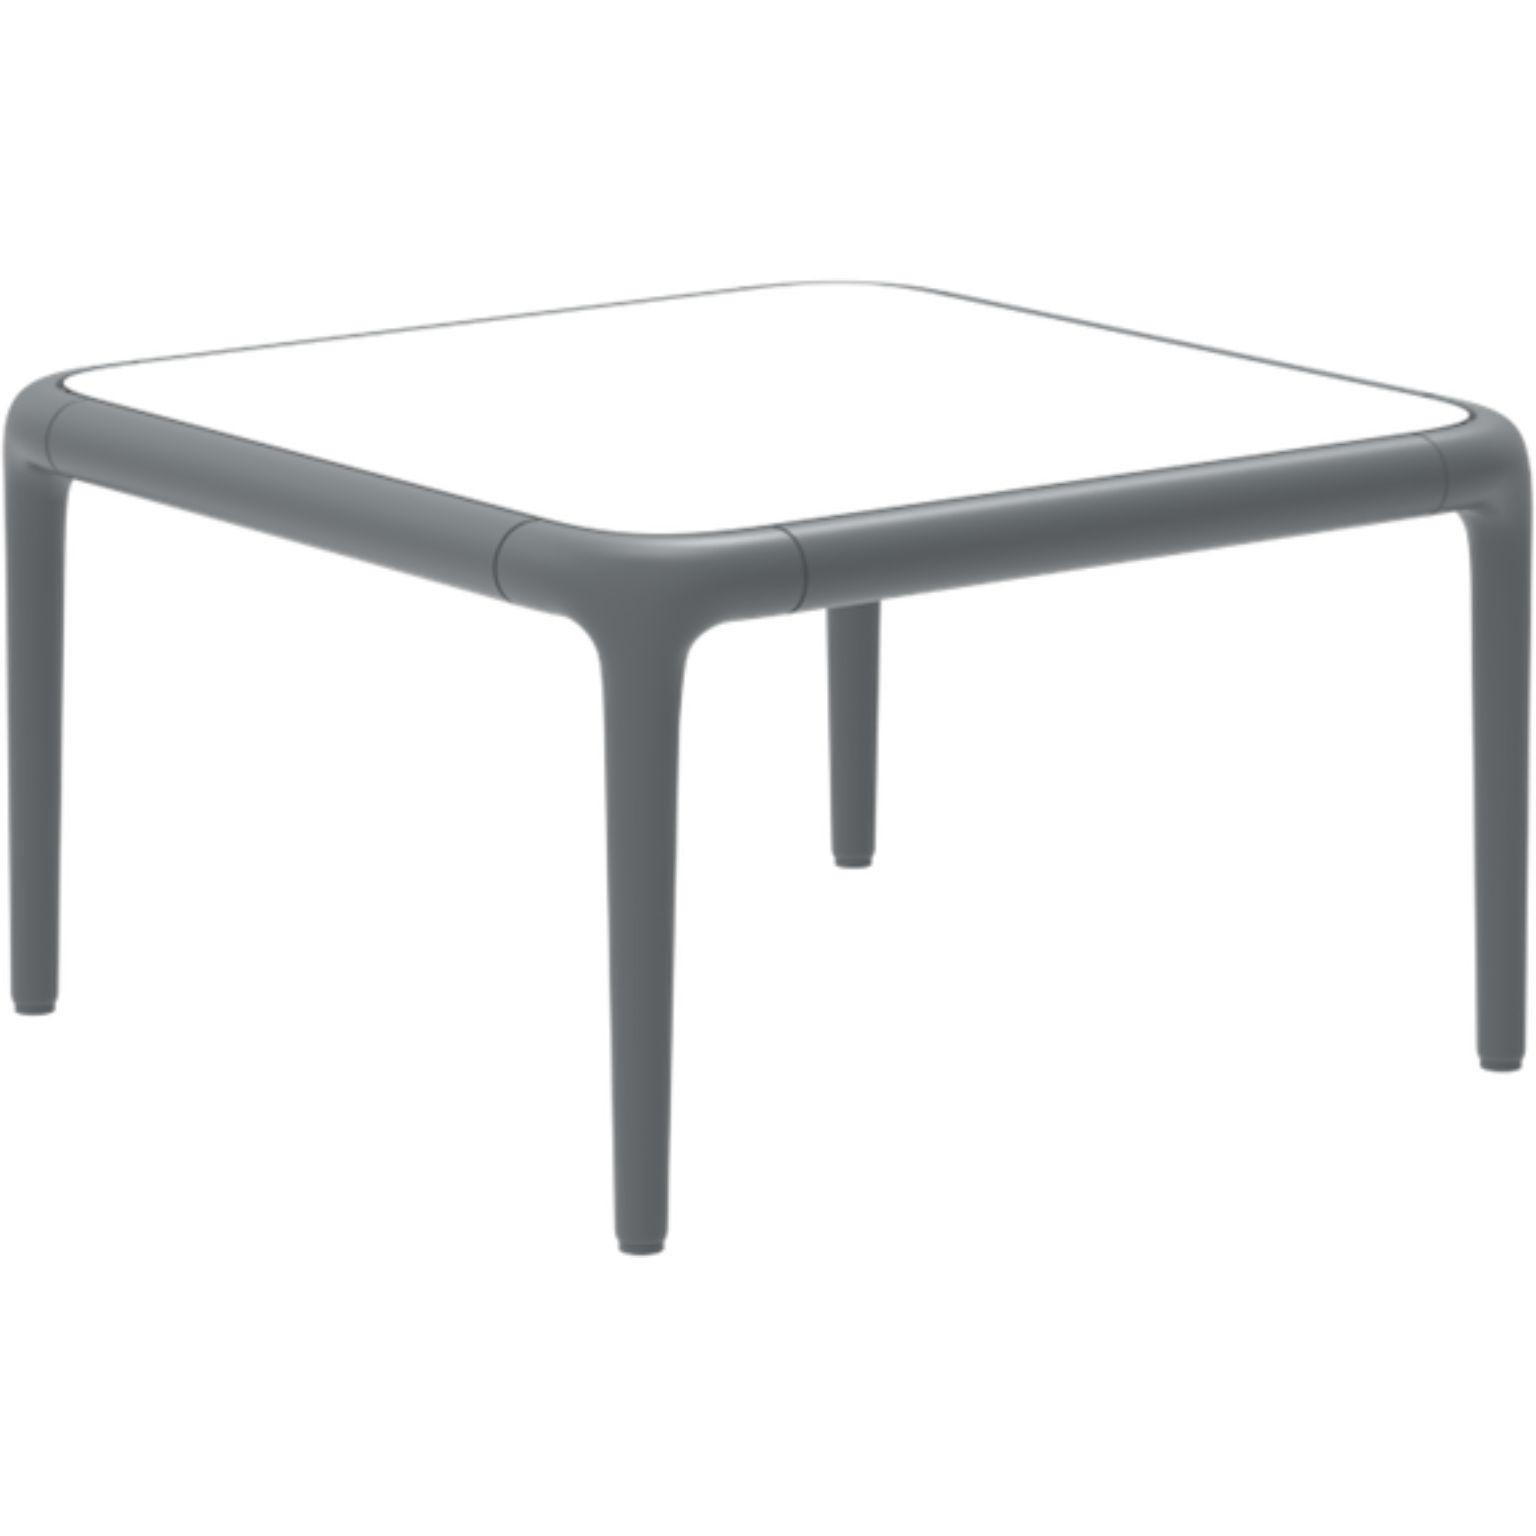 Xaloc grey coffee table 50 with glass top by Mowee.
Dimensions: D50 x W50 x H28 cm
Materials: Aluminum, tinted tempered glass top.
Also available in different aluminum colors and finishes (HPL Black Edge or Neolith).

Xaloc synthesizes the